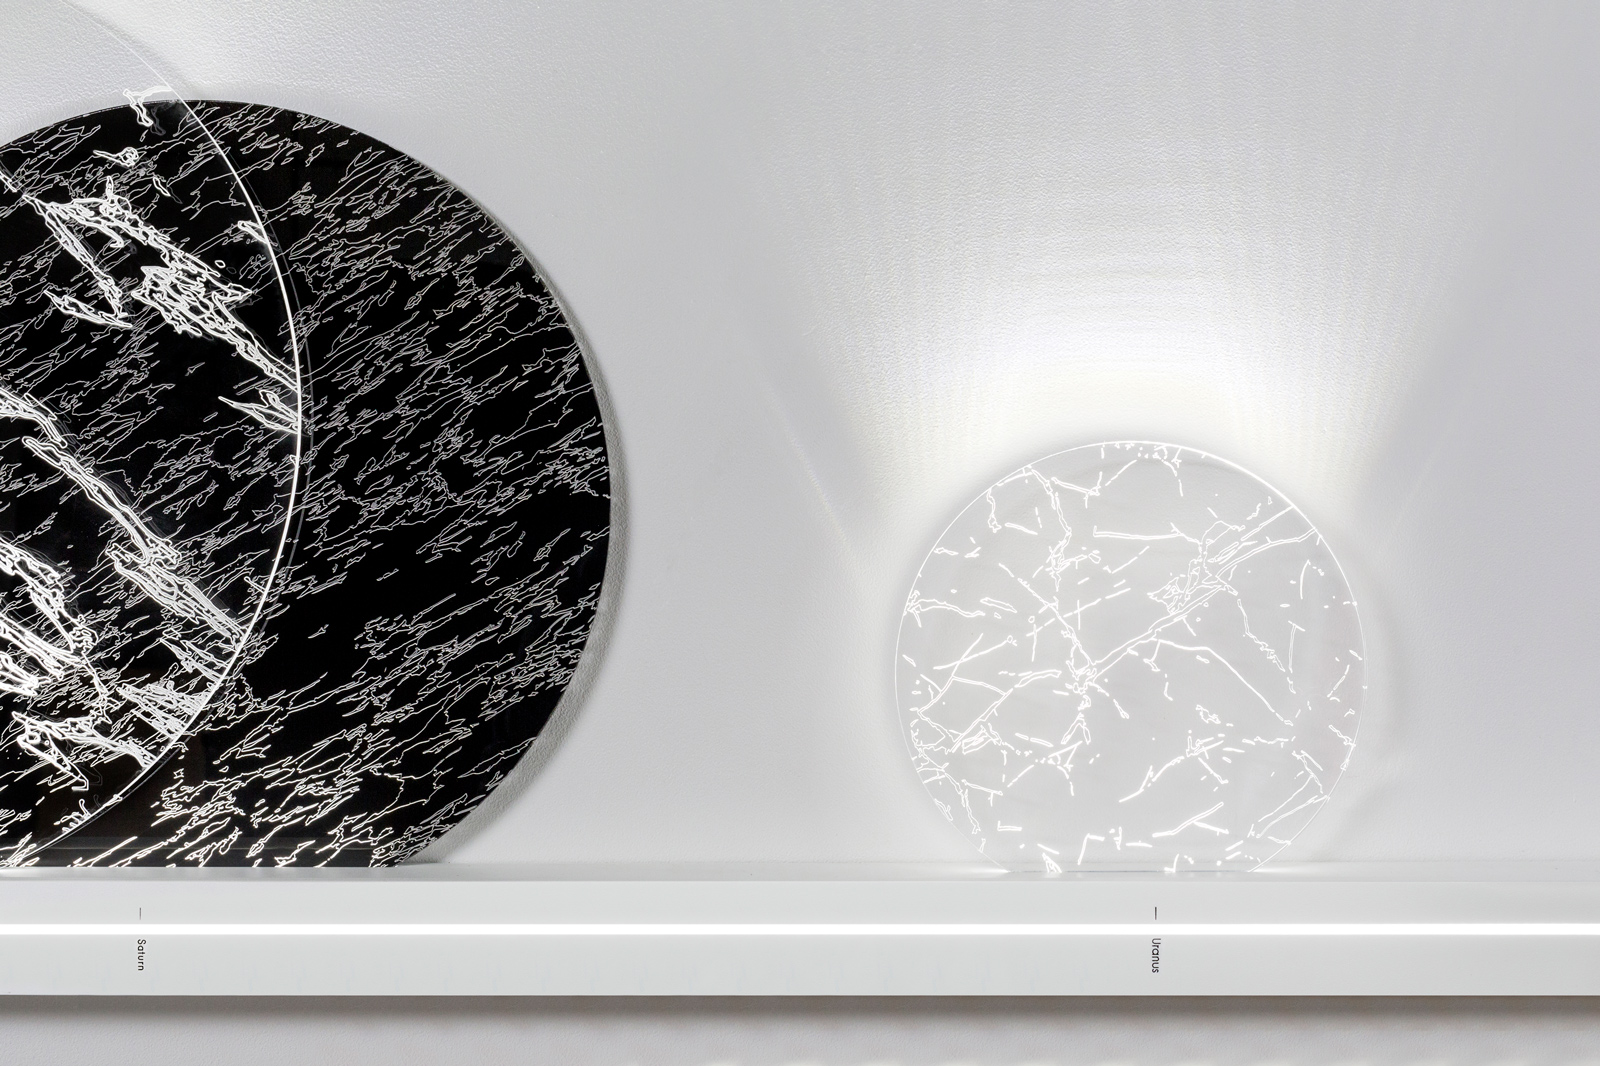 LUX TEMPORA BO, a CASSIOM light sculpture, inspired by our solar system, design by Ludovic Roth, Saturn and Uranus